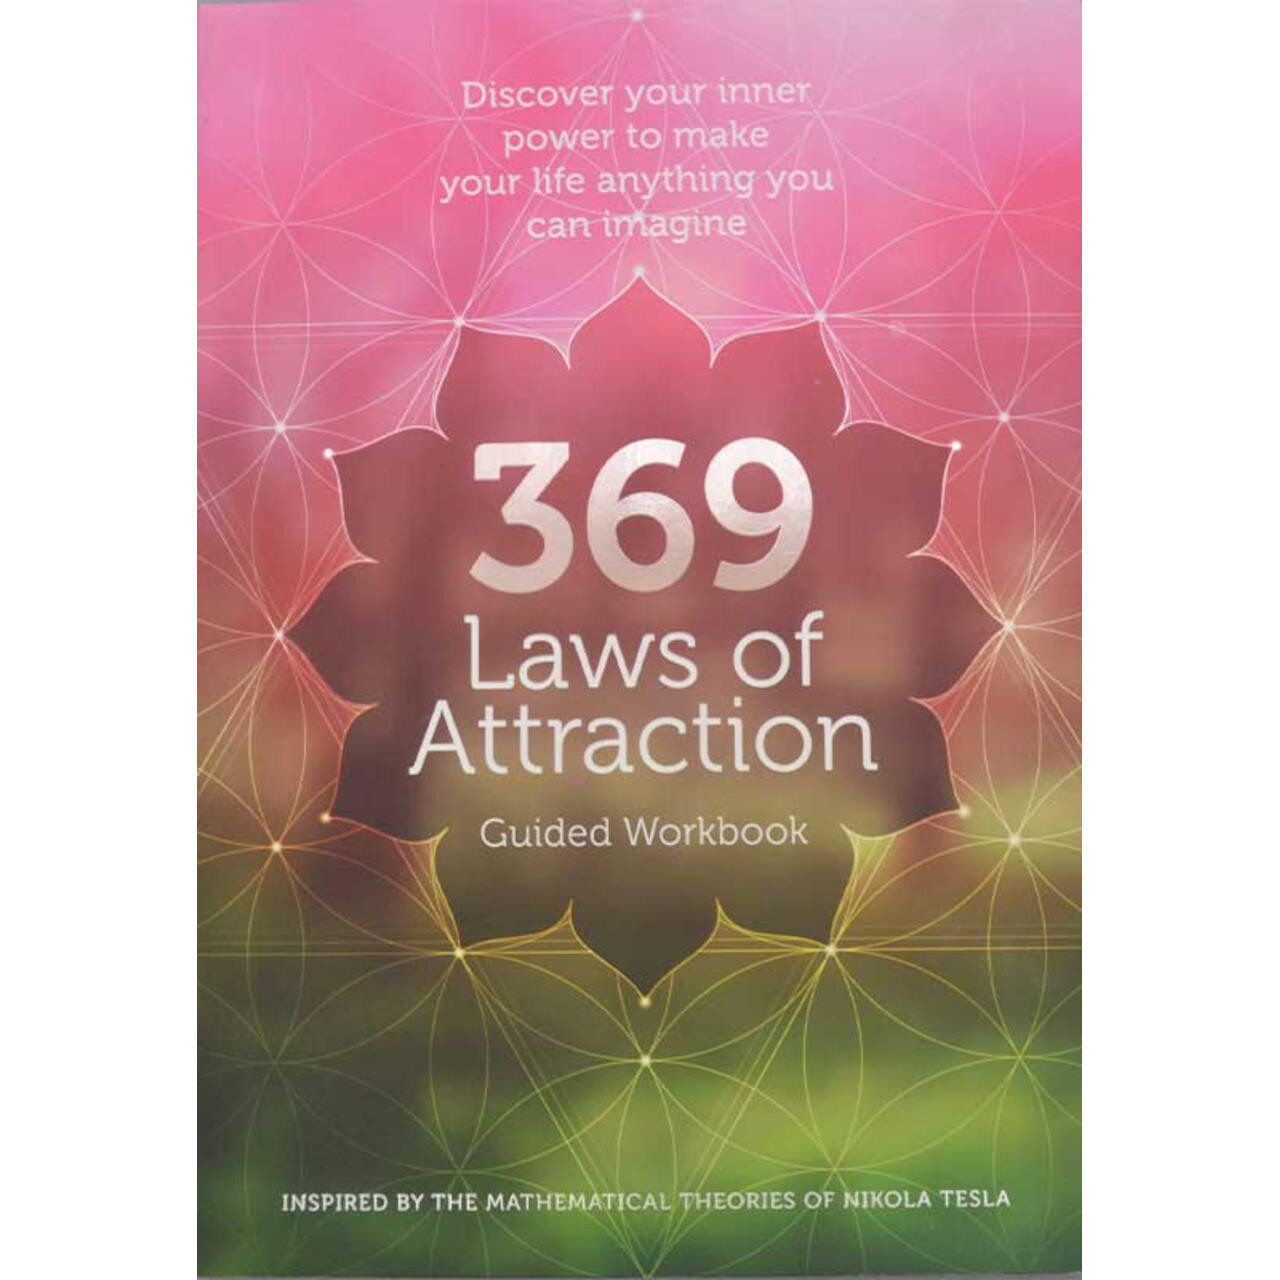 369 Laws Of Attraction